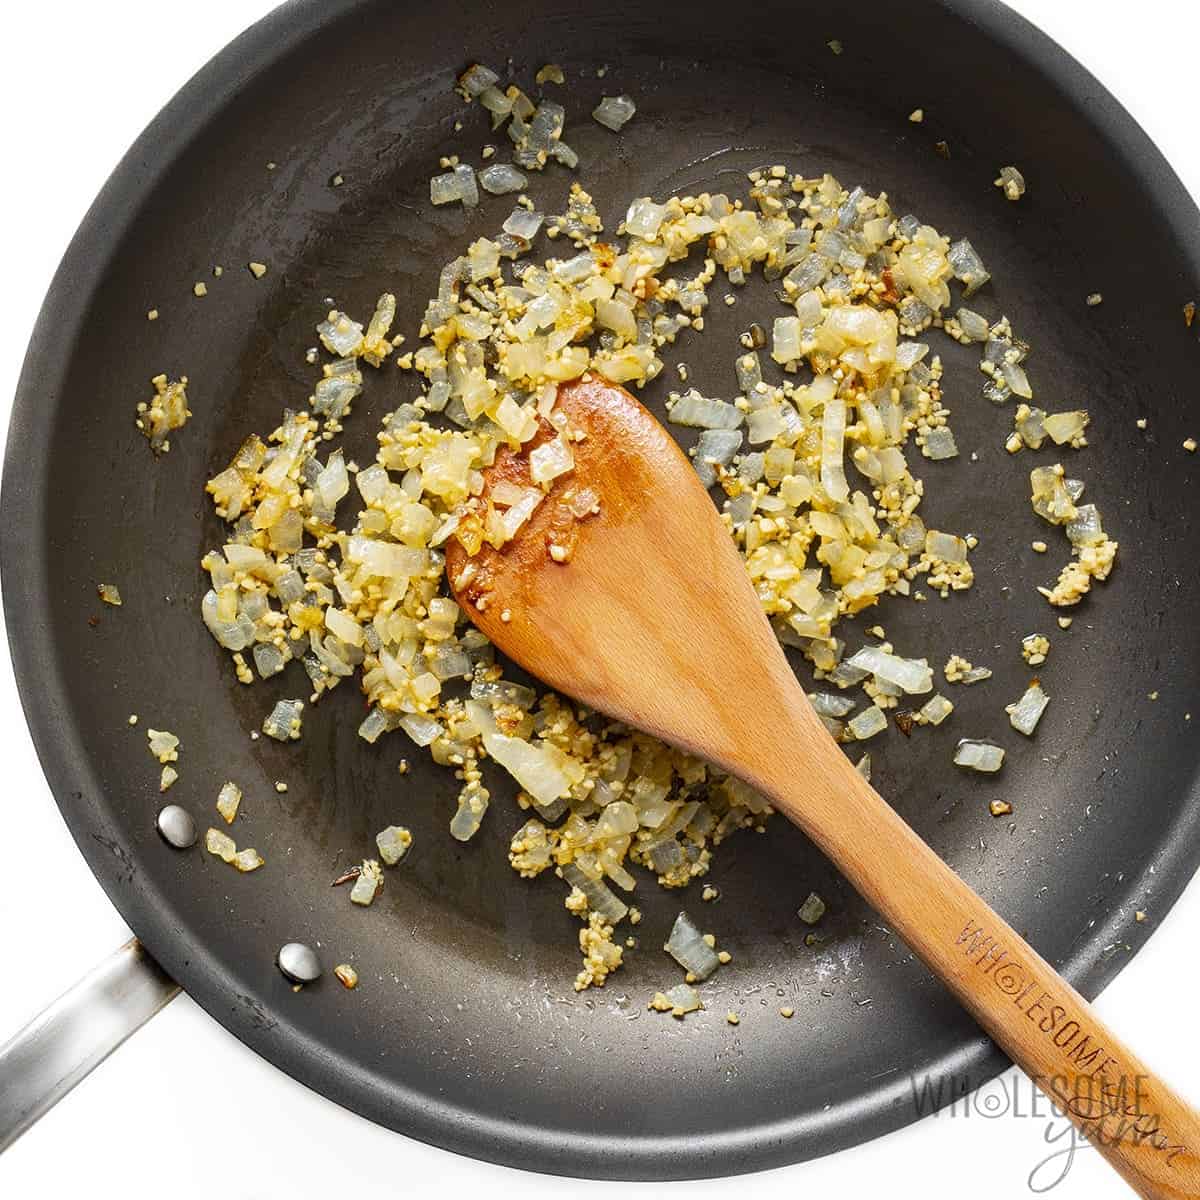 Sauteed onions and garlic in a skillet